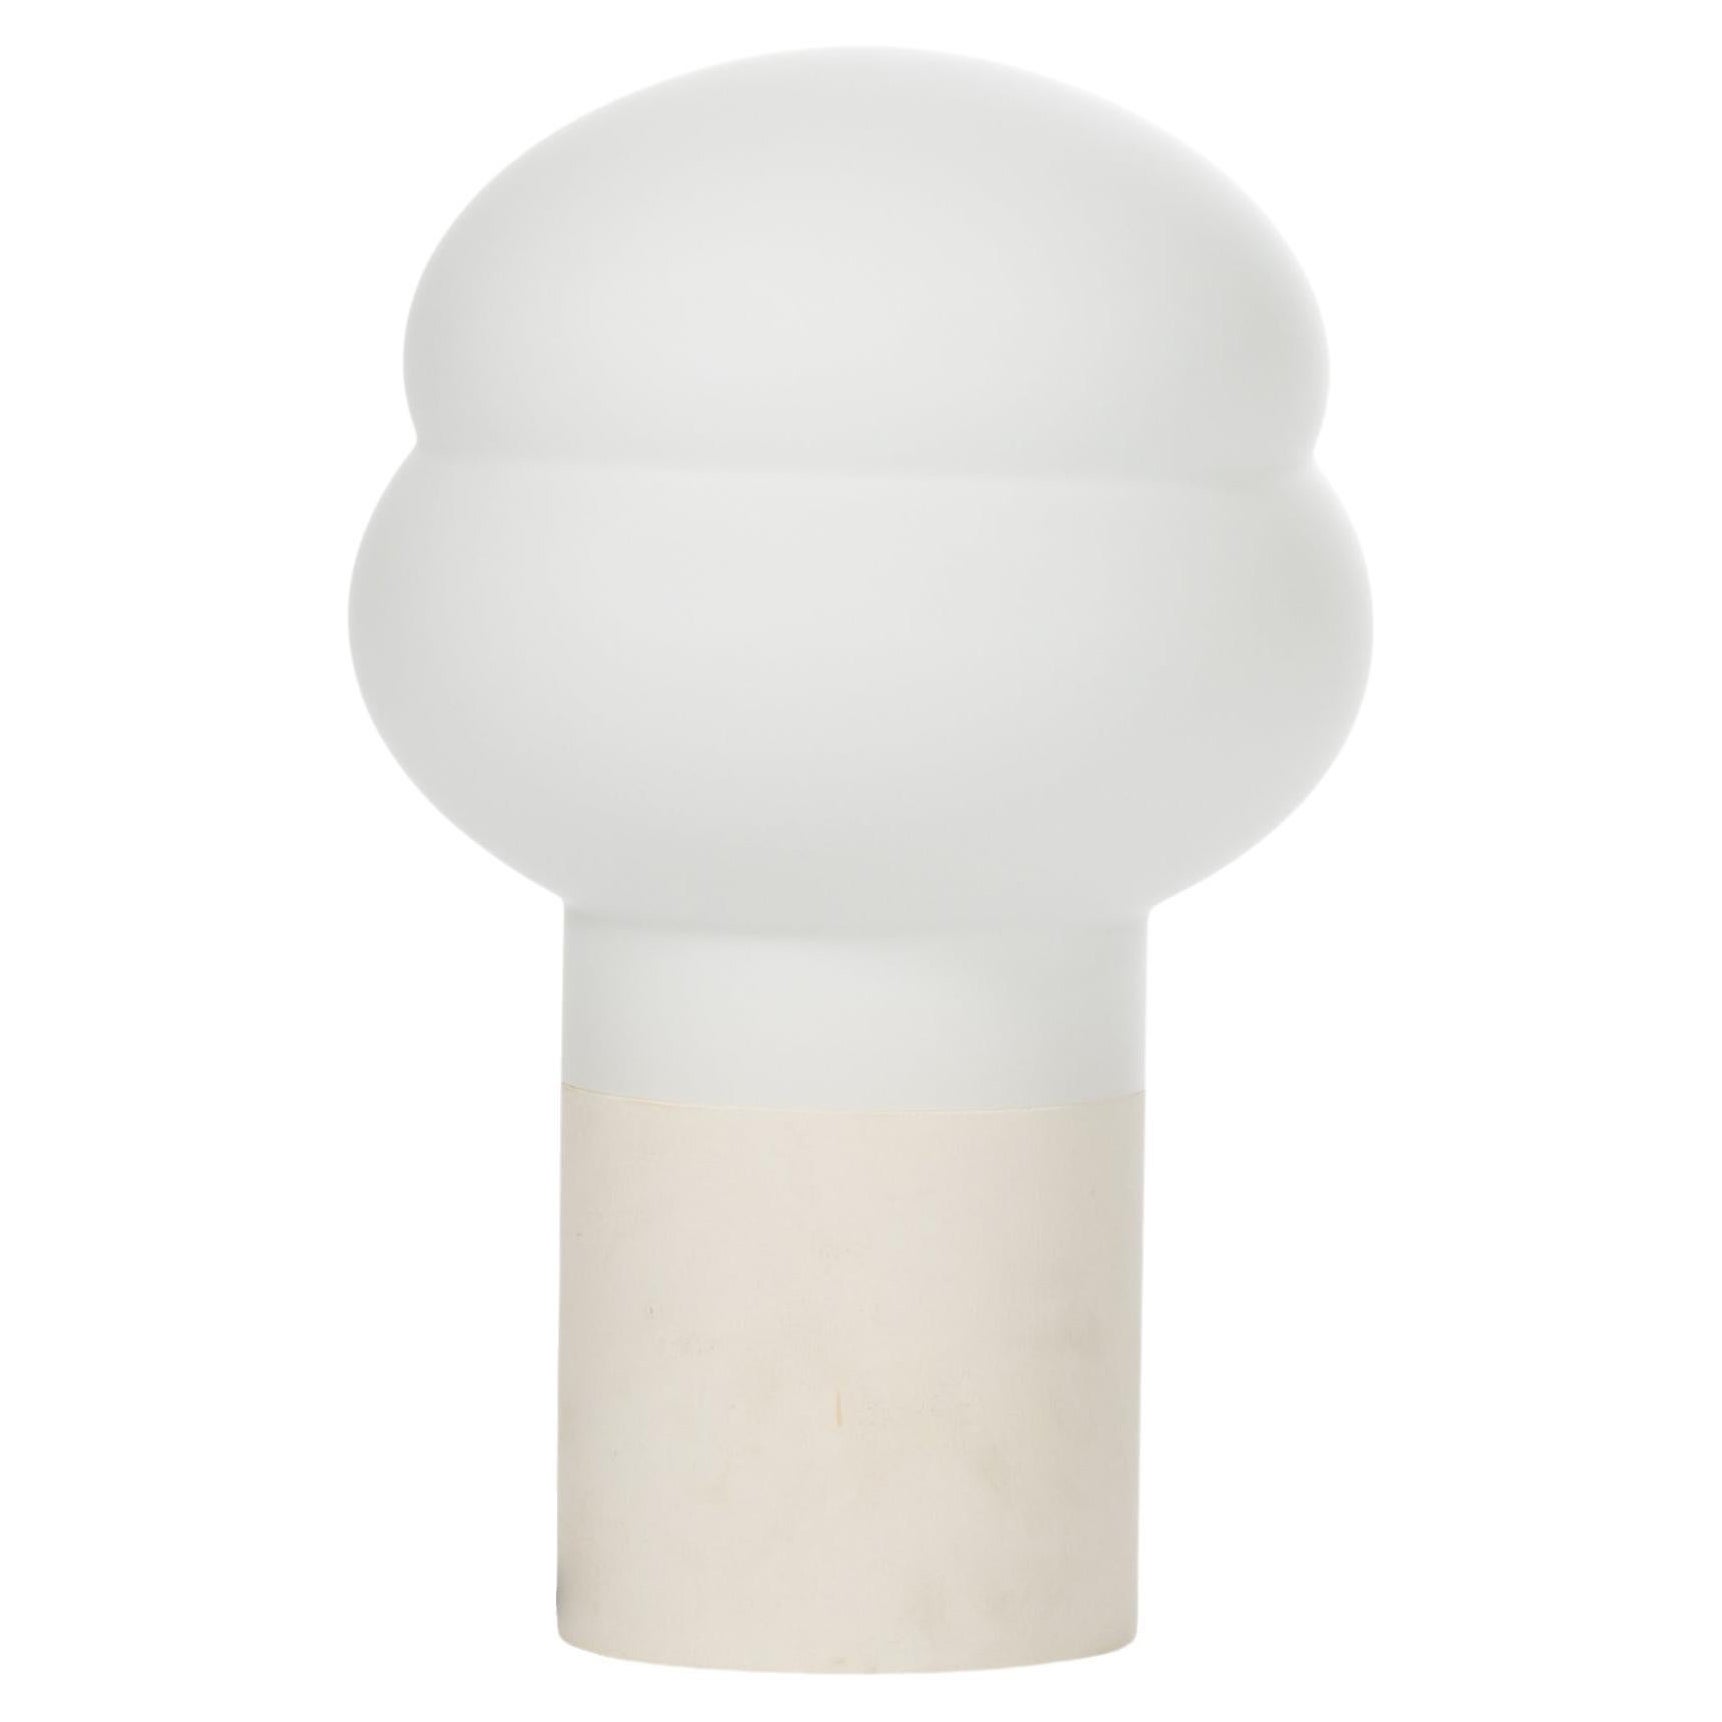 Kumo High White Acetato White Floor Lamp by Pulpo For Sale